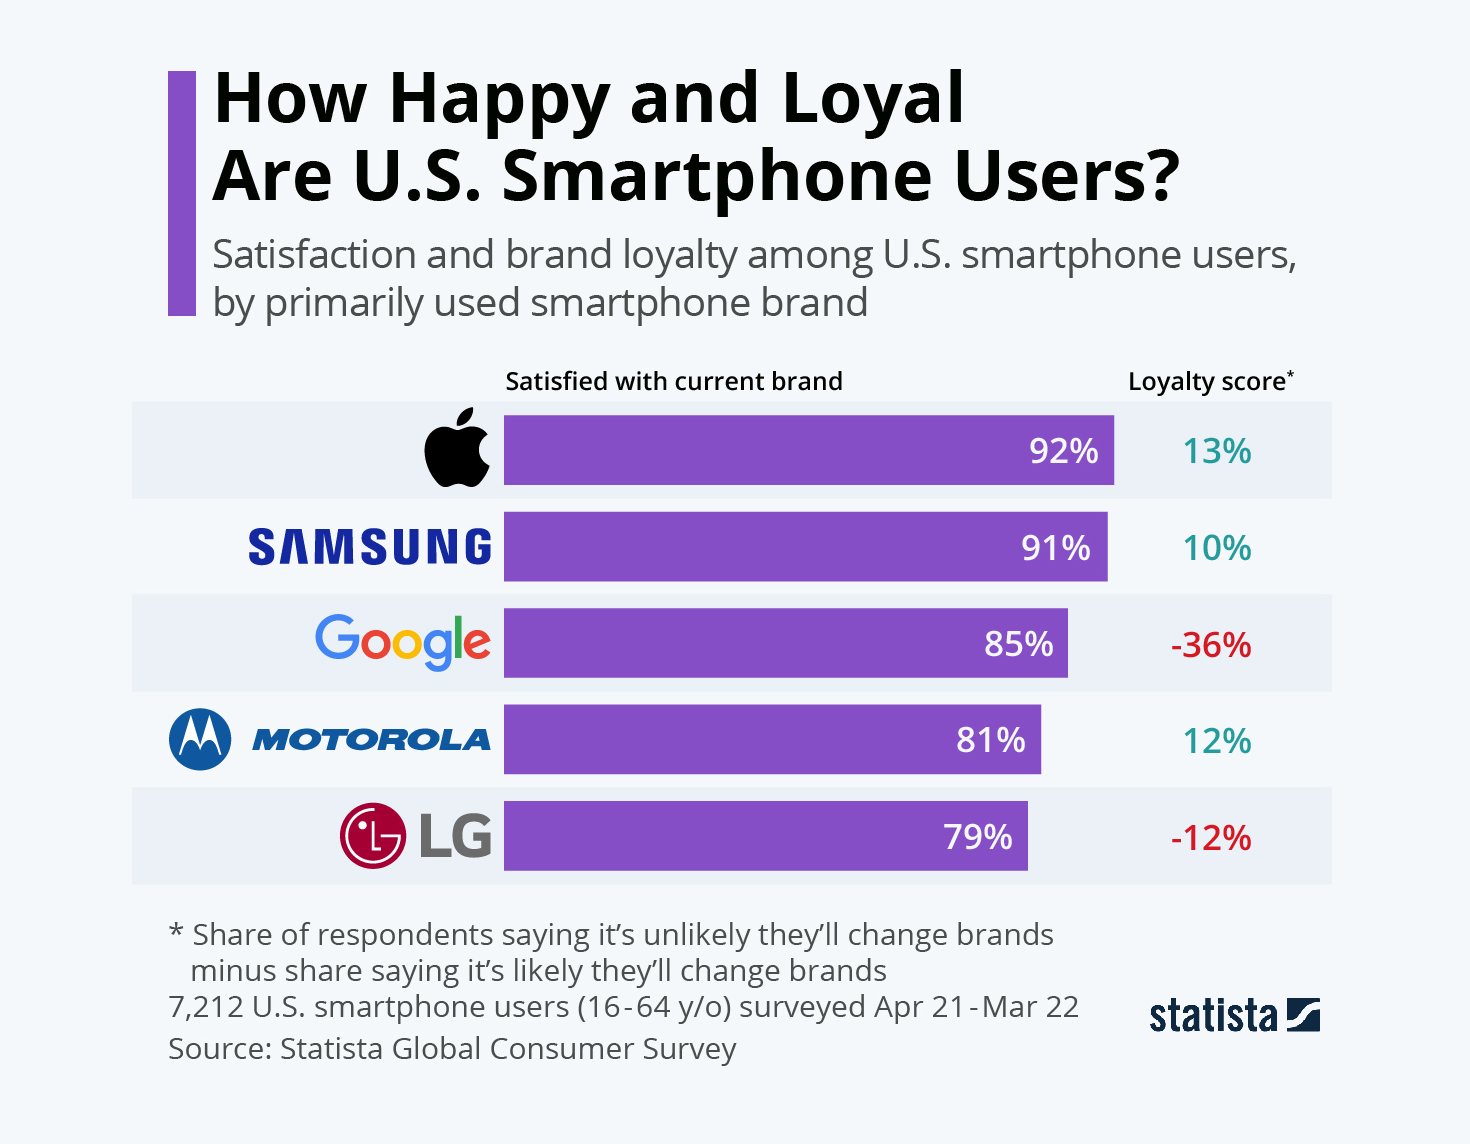 How Happy And Loyal Are U.S. Smartphone Users?